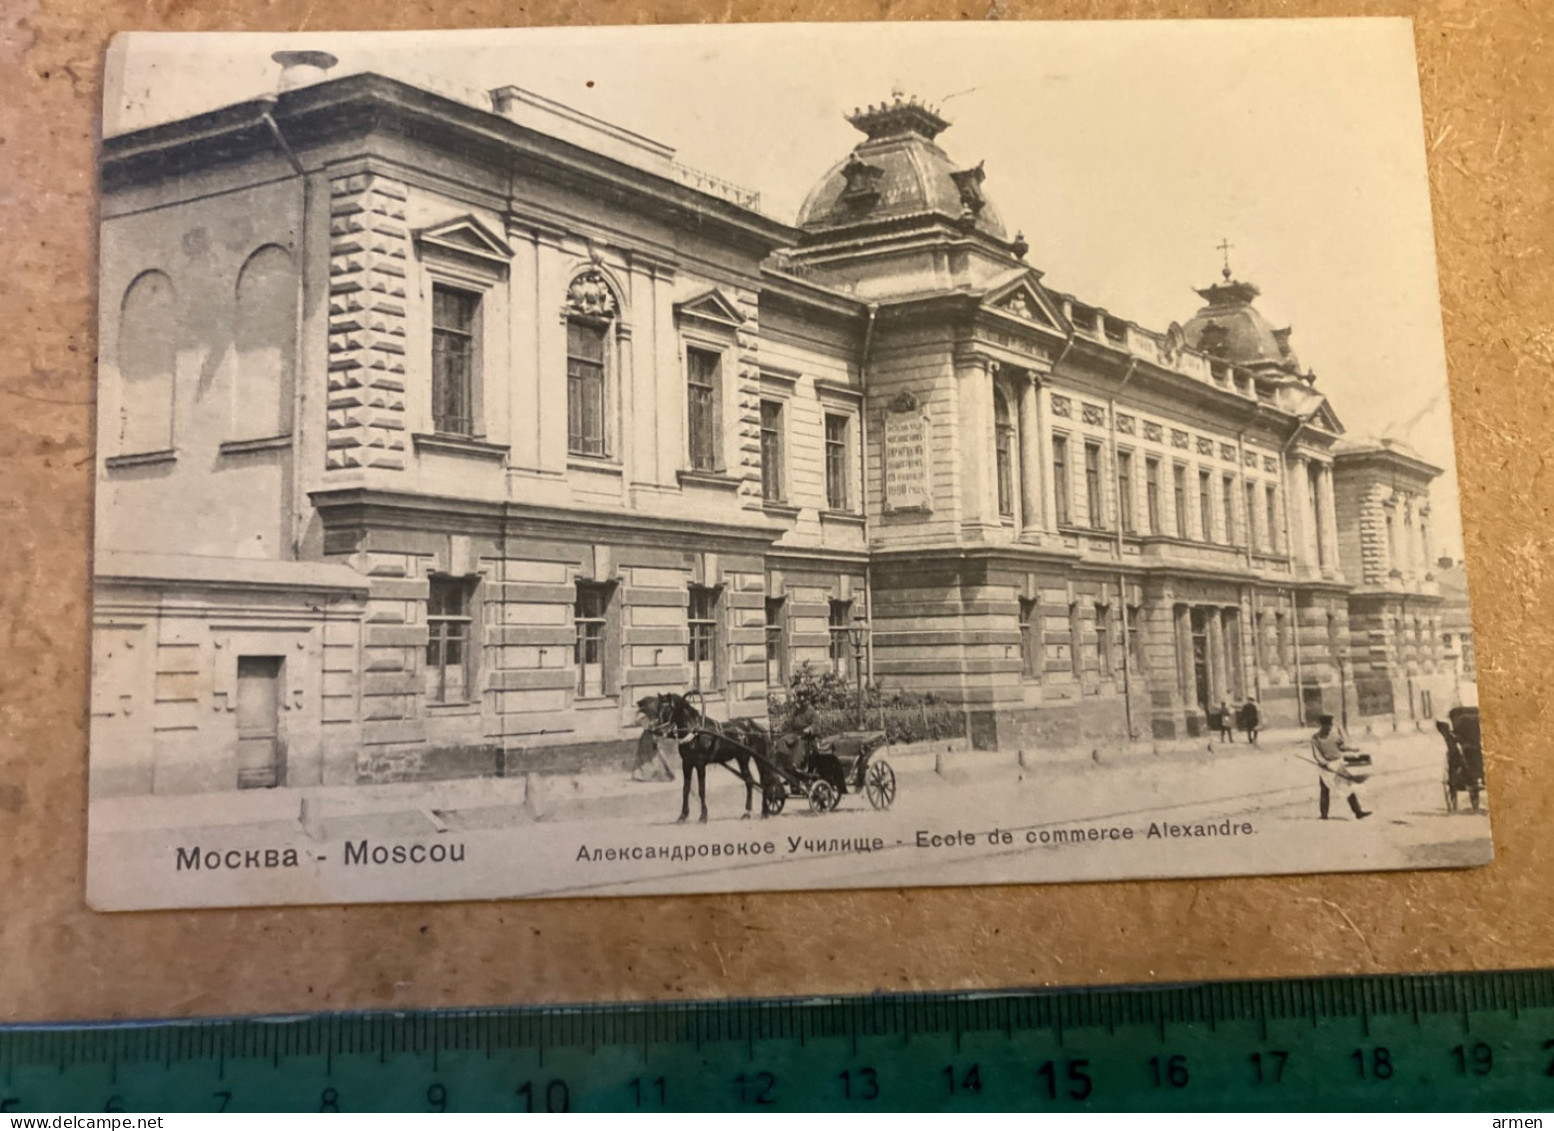 Cpa Russie Russia Moscou Moskba Moscow - École De Commerce Alexandre 1911 - Russland